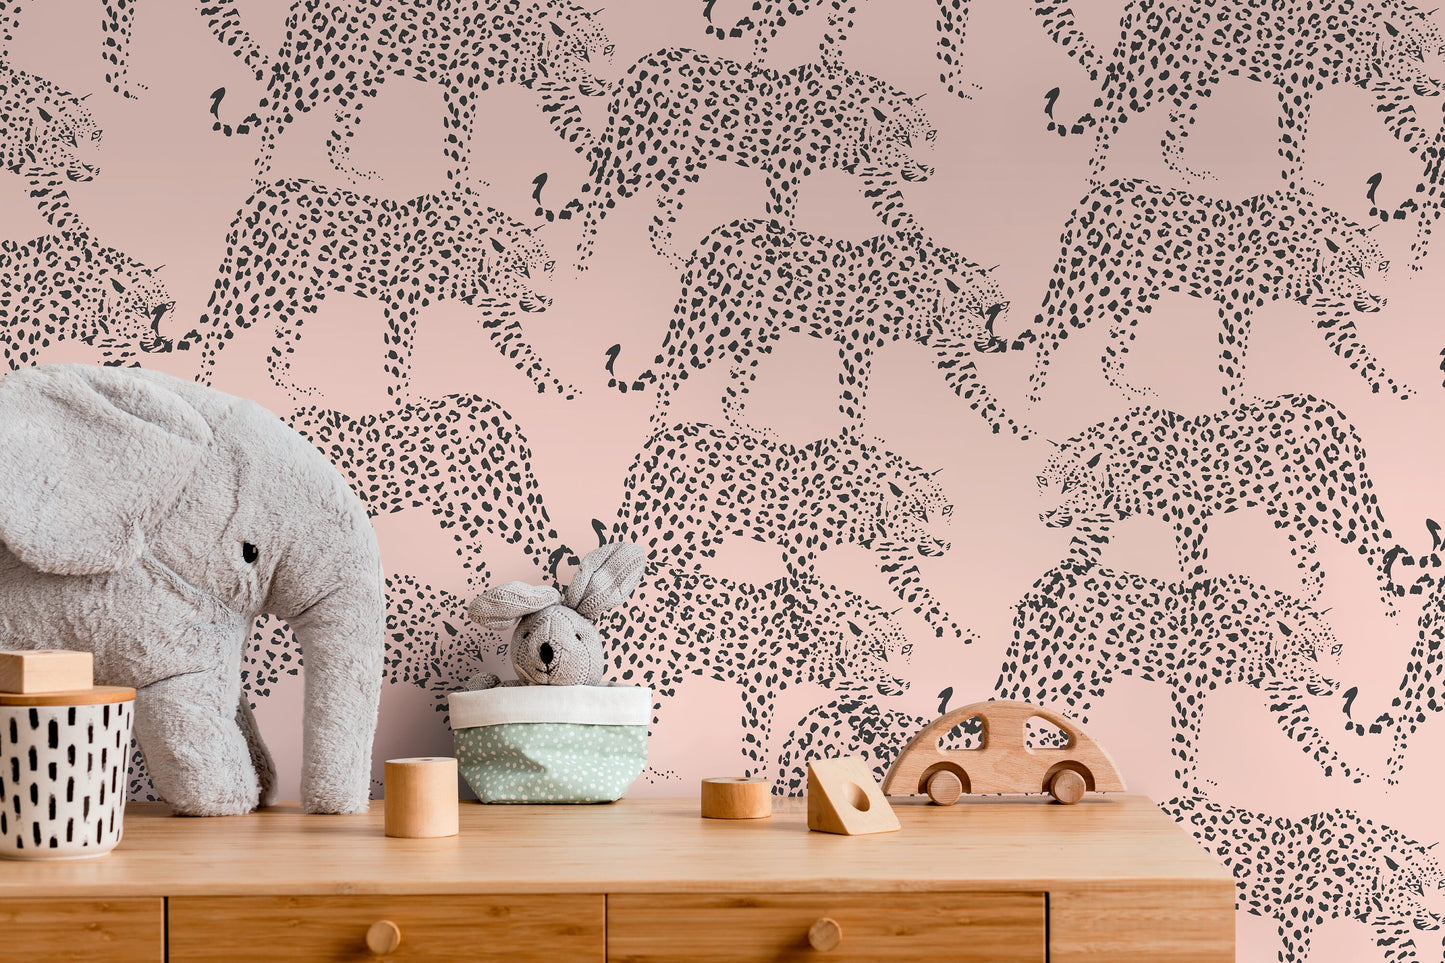 Pink Boho Cheetah Wallpaper Removable and Repositionable Peel and Stick or Traditional Pre-pasted Wallpaper - ZADM